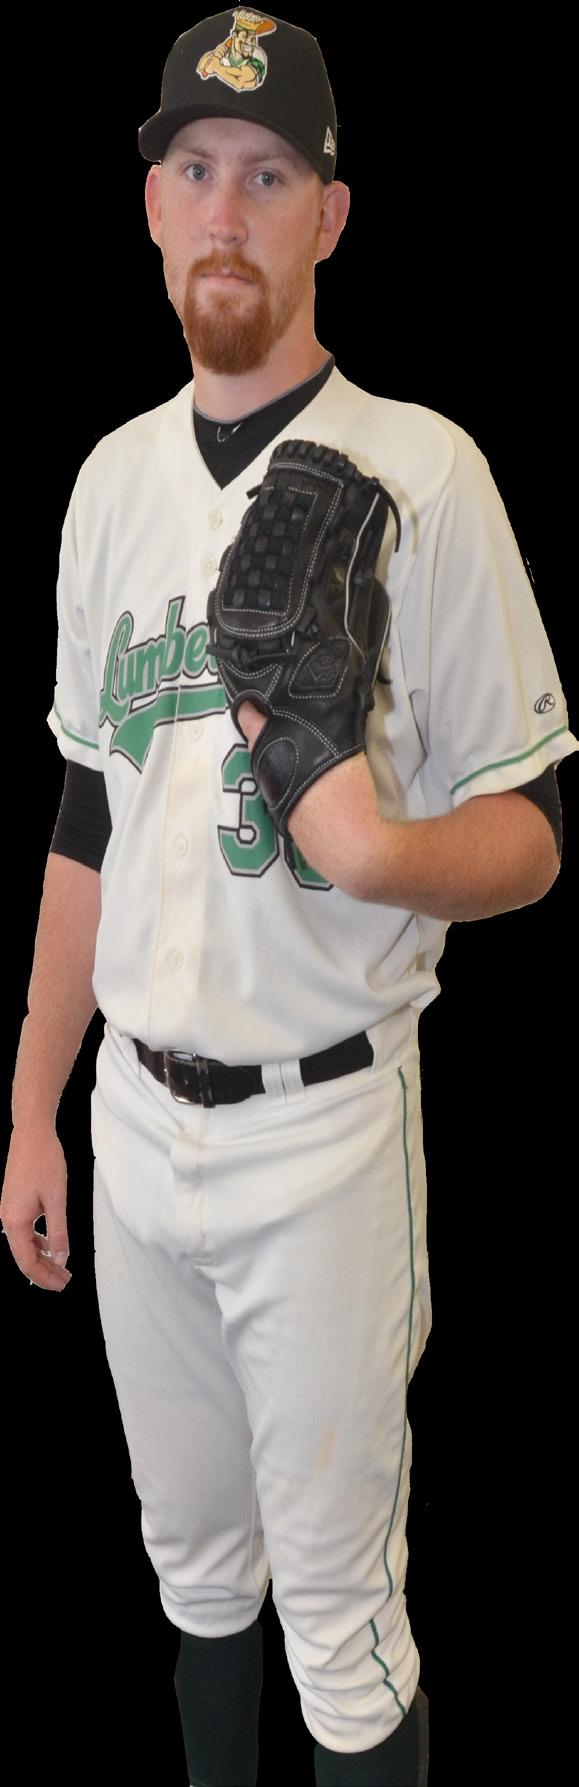 Today s Starting Pitcher RHP #6 Zack Littell Born: October 5, 995 Height/Weight: 6, 9 LBS Resides: Mebane, NC Acquired: th Round of Draft Career Statistics Year Team WL ERA G/GS IP H R ER BB SO HR